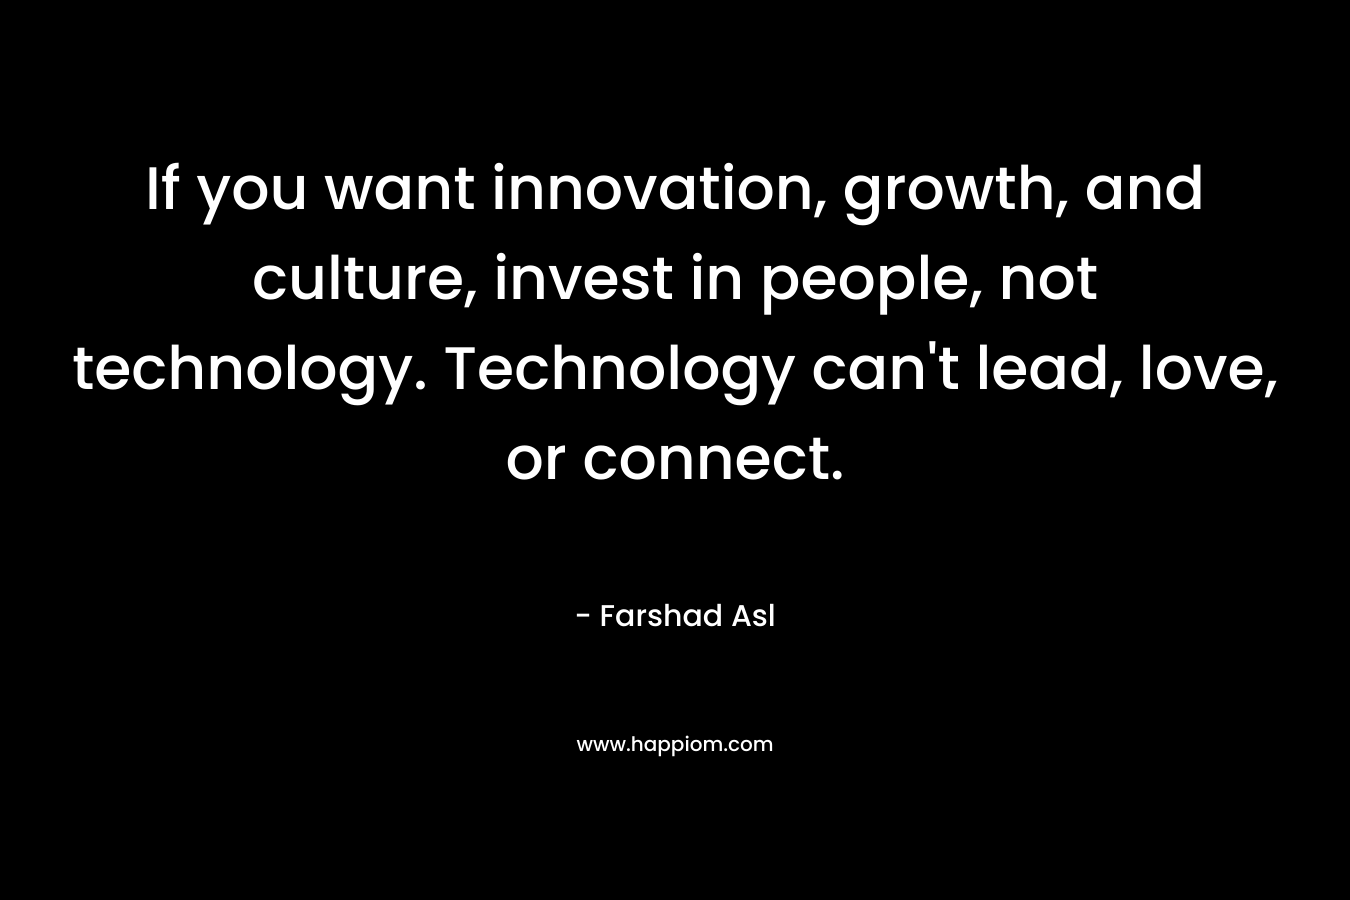 If you want innovation, growth, and culture, invest in people, not technology. Technology can't lead, love, or connect.